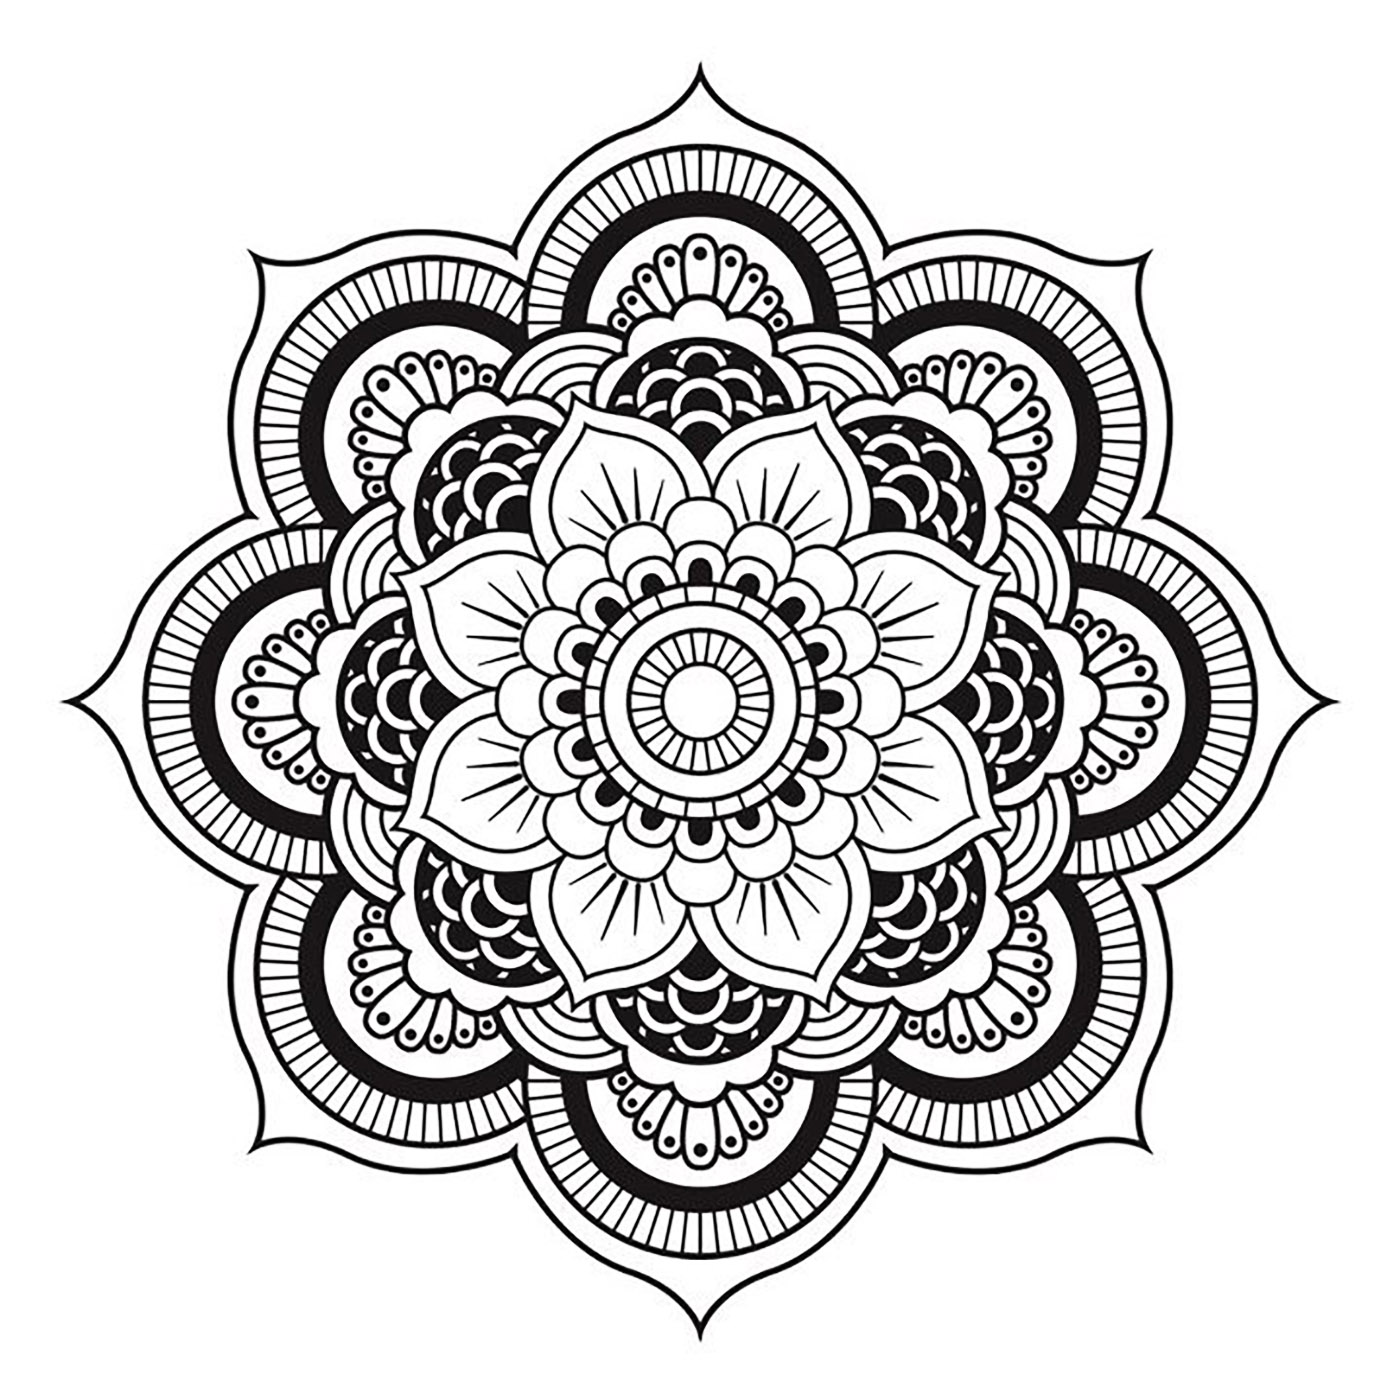 Mandala to download free simple flower - M&alas Adult Coloring Pages